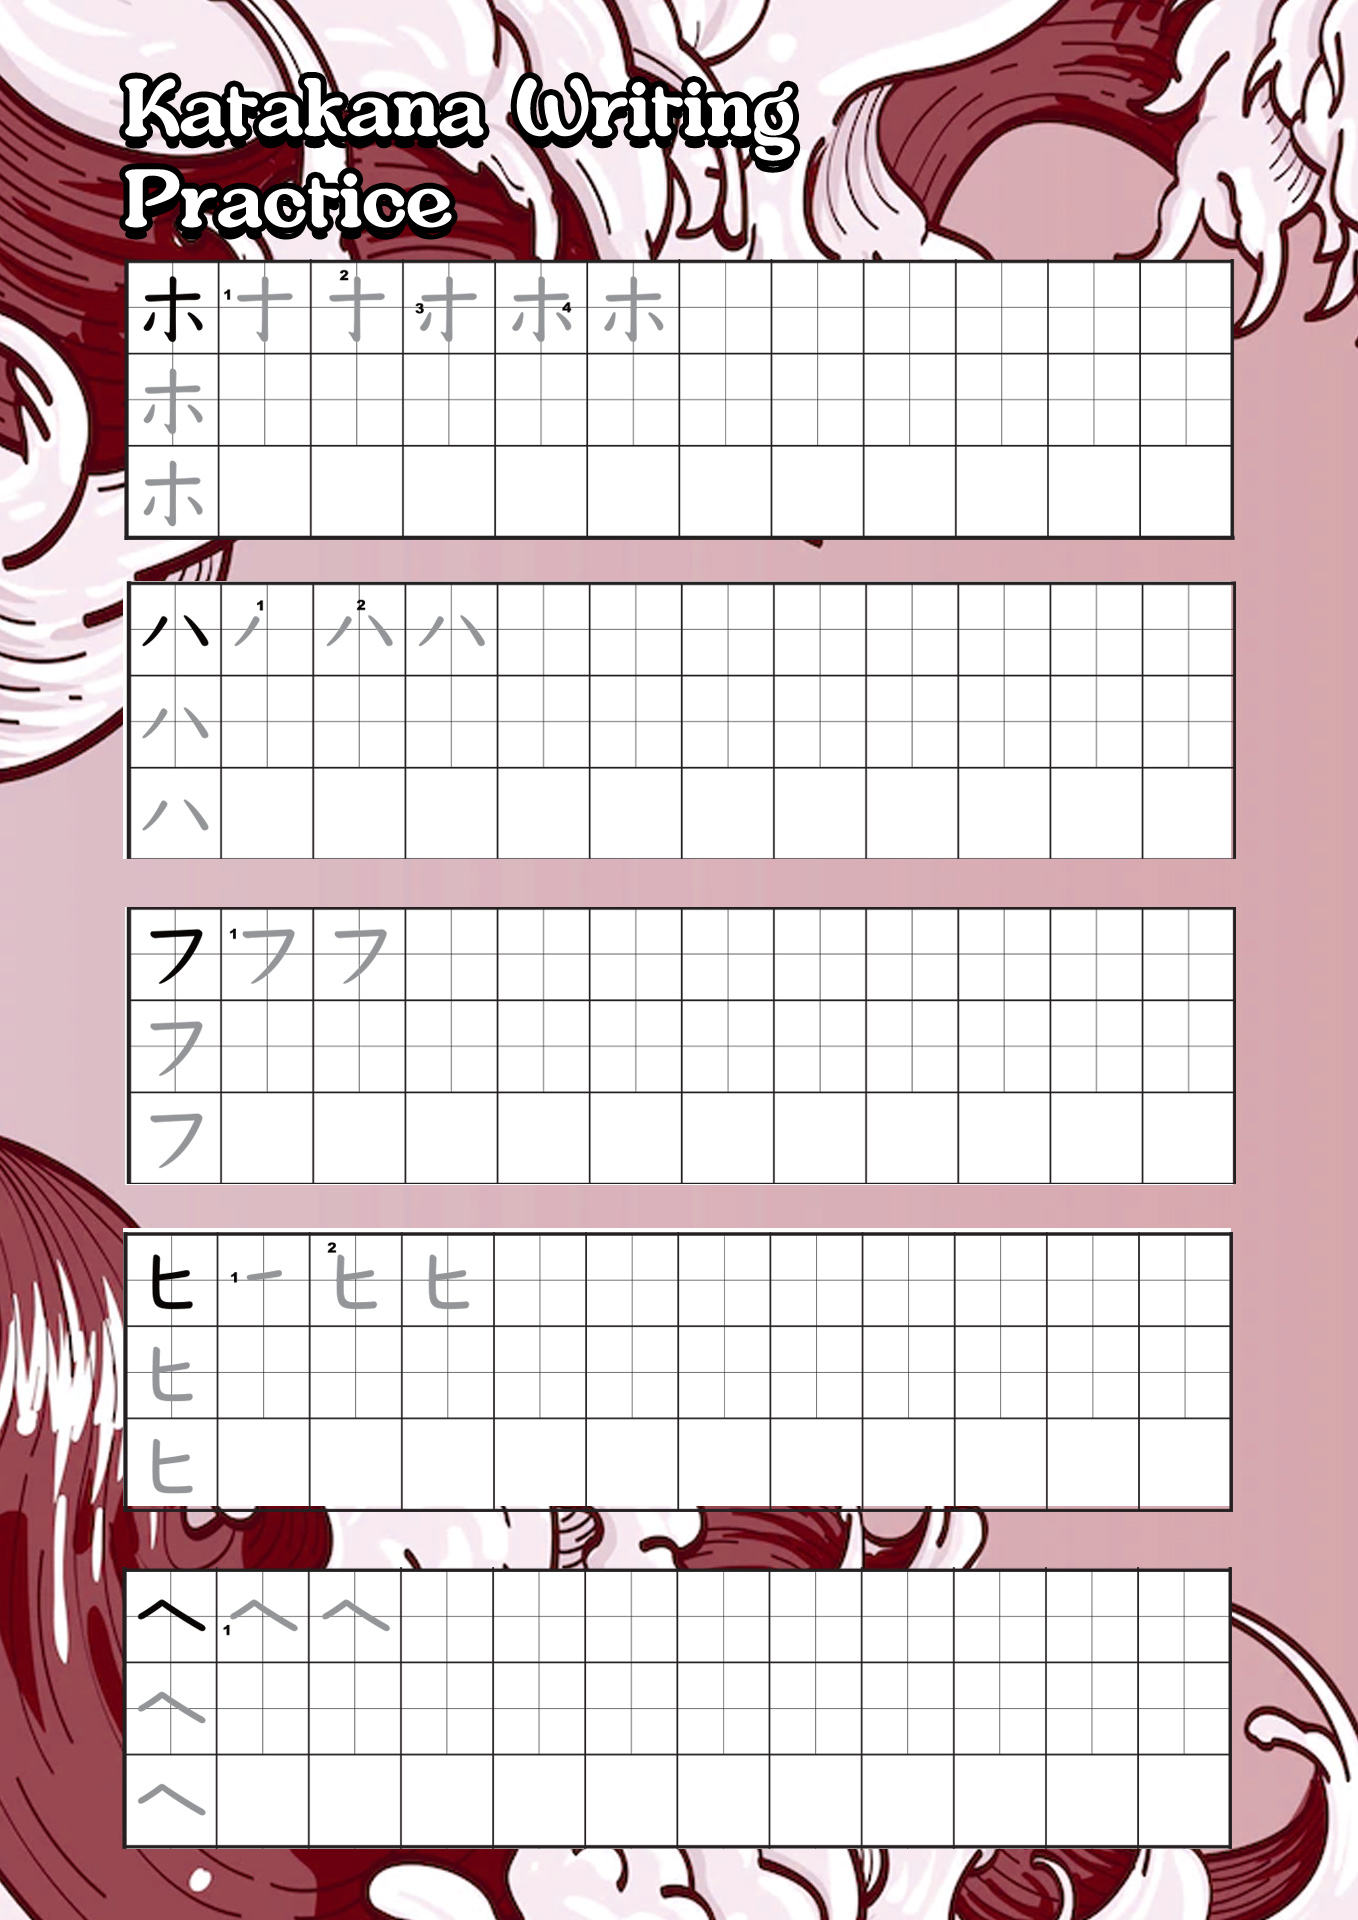 16 Best Images of Japanese Writing Worksheets - How to ...